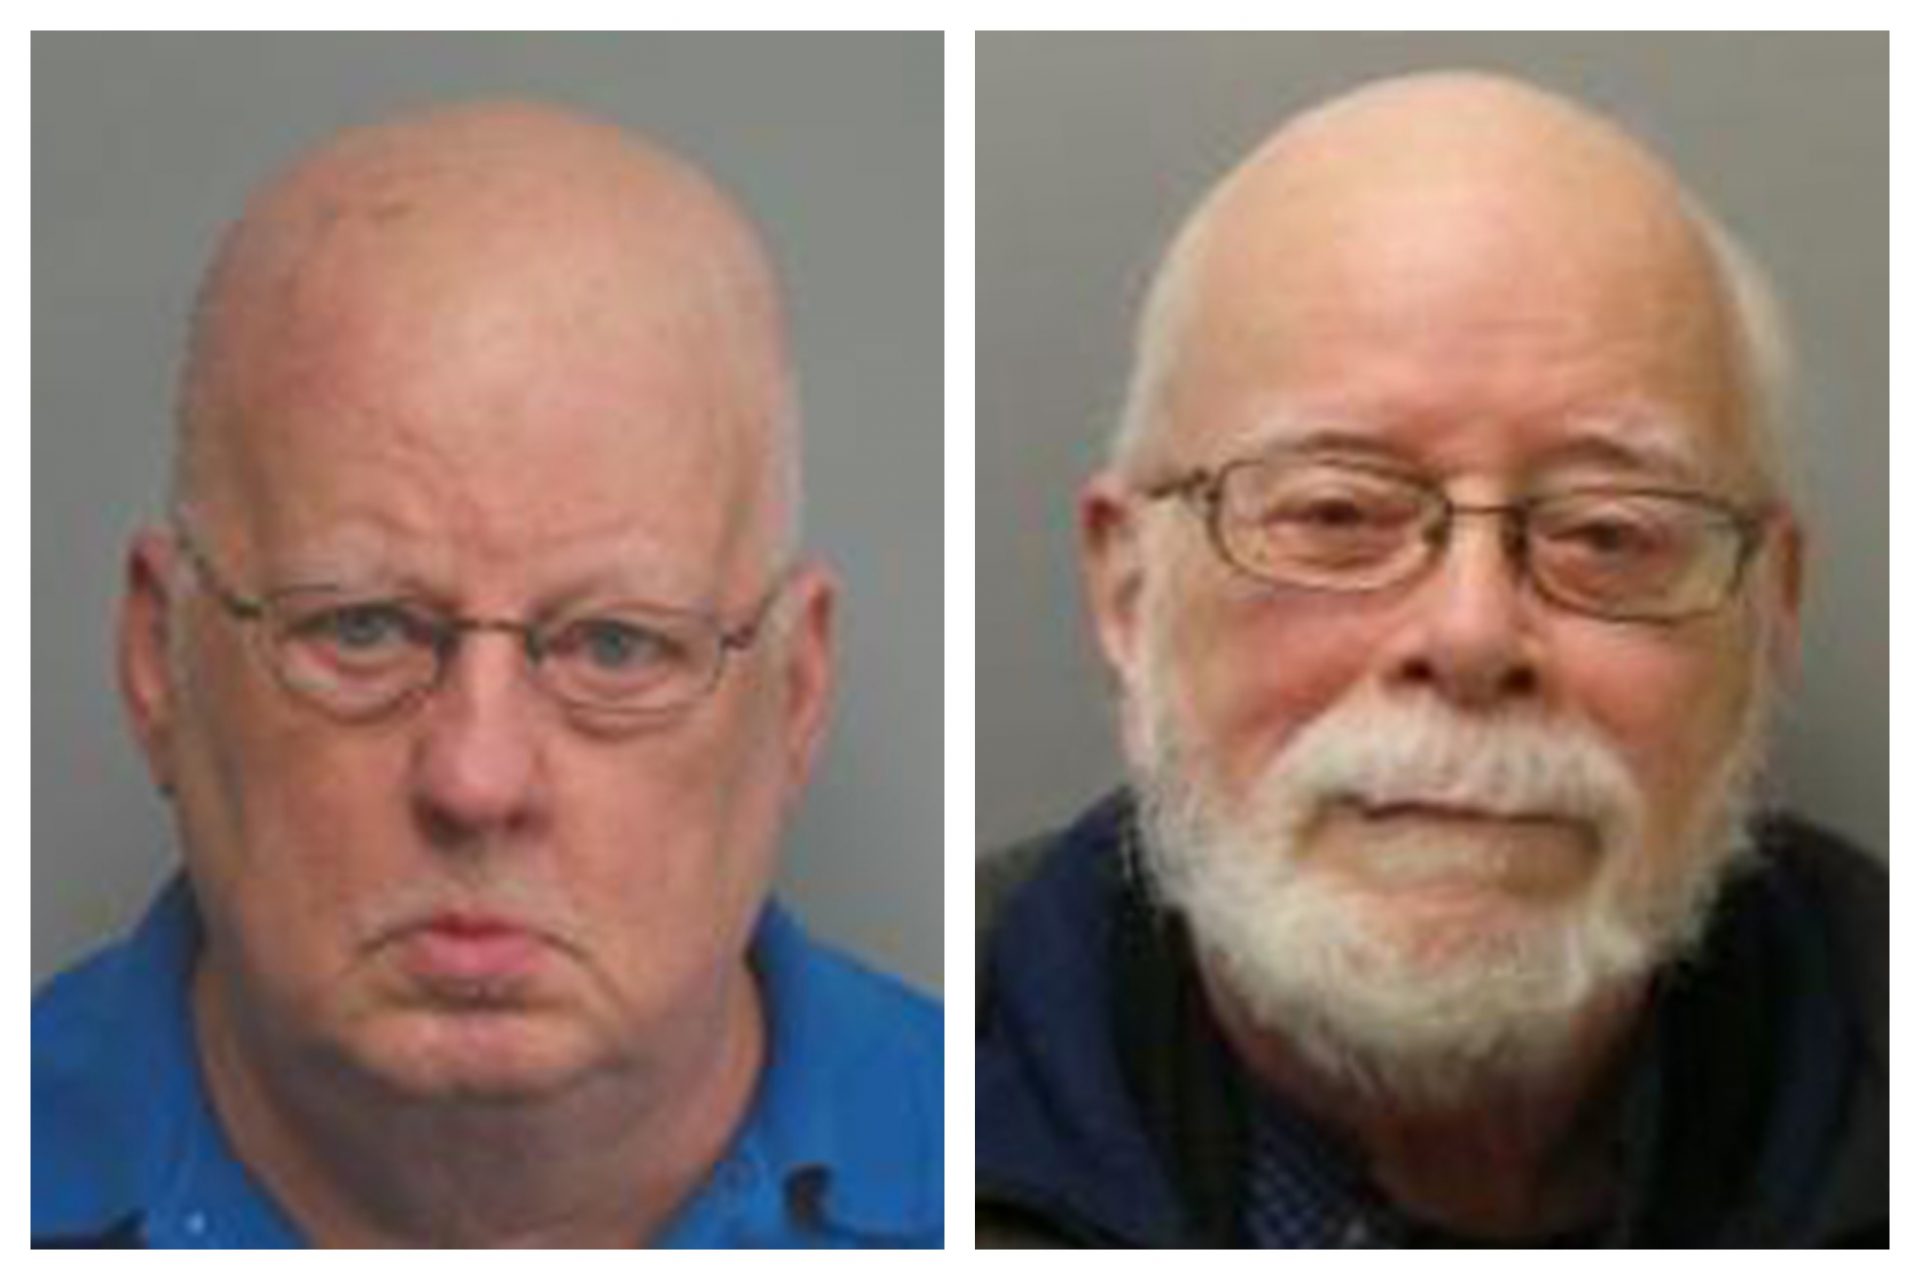 This combination of 2019 and 2017 photos made available by the Missouri State Highway Patrol shows James Alan Funke, left, and Jerome Bernard Robben. Three decades earlier, Funke, a Catholic priest; and Robben, a fellow teacher at a St. Louis Catholic high school, went to prison for sexually abusing male students together. Funke, released in 1995, was eventually bounced from the priesthood. But years later, the two men joined together again, promoting Robben as the leader of a church of his own making. 